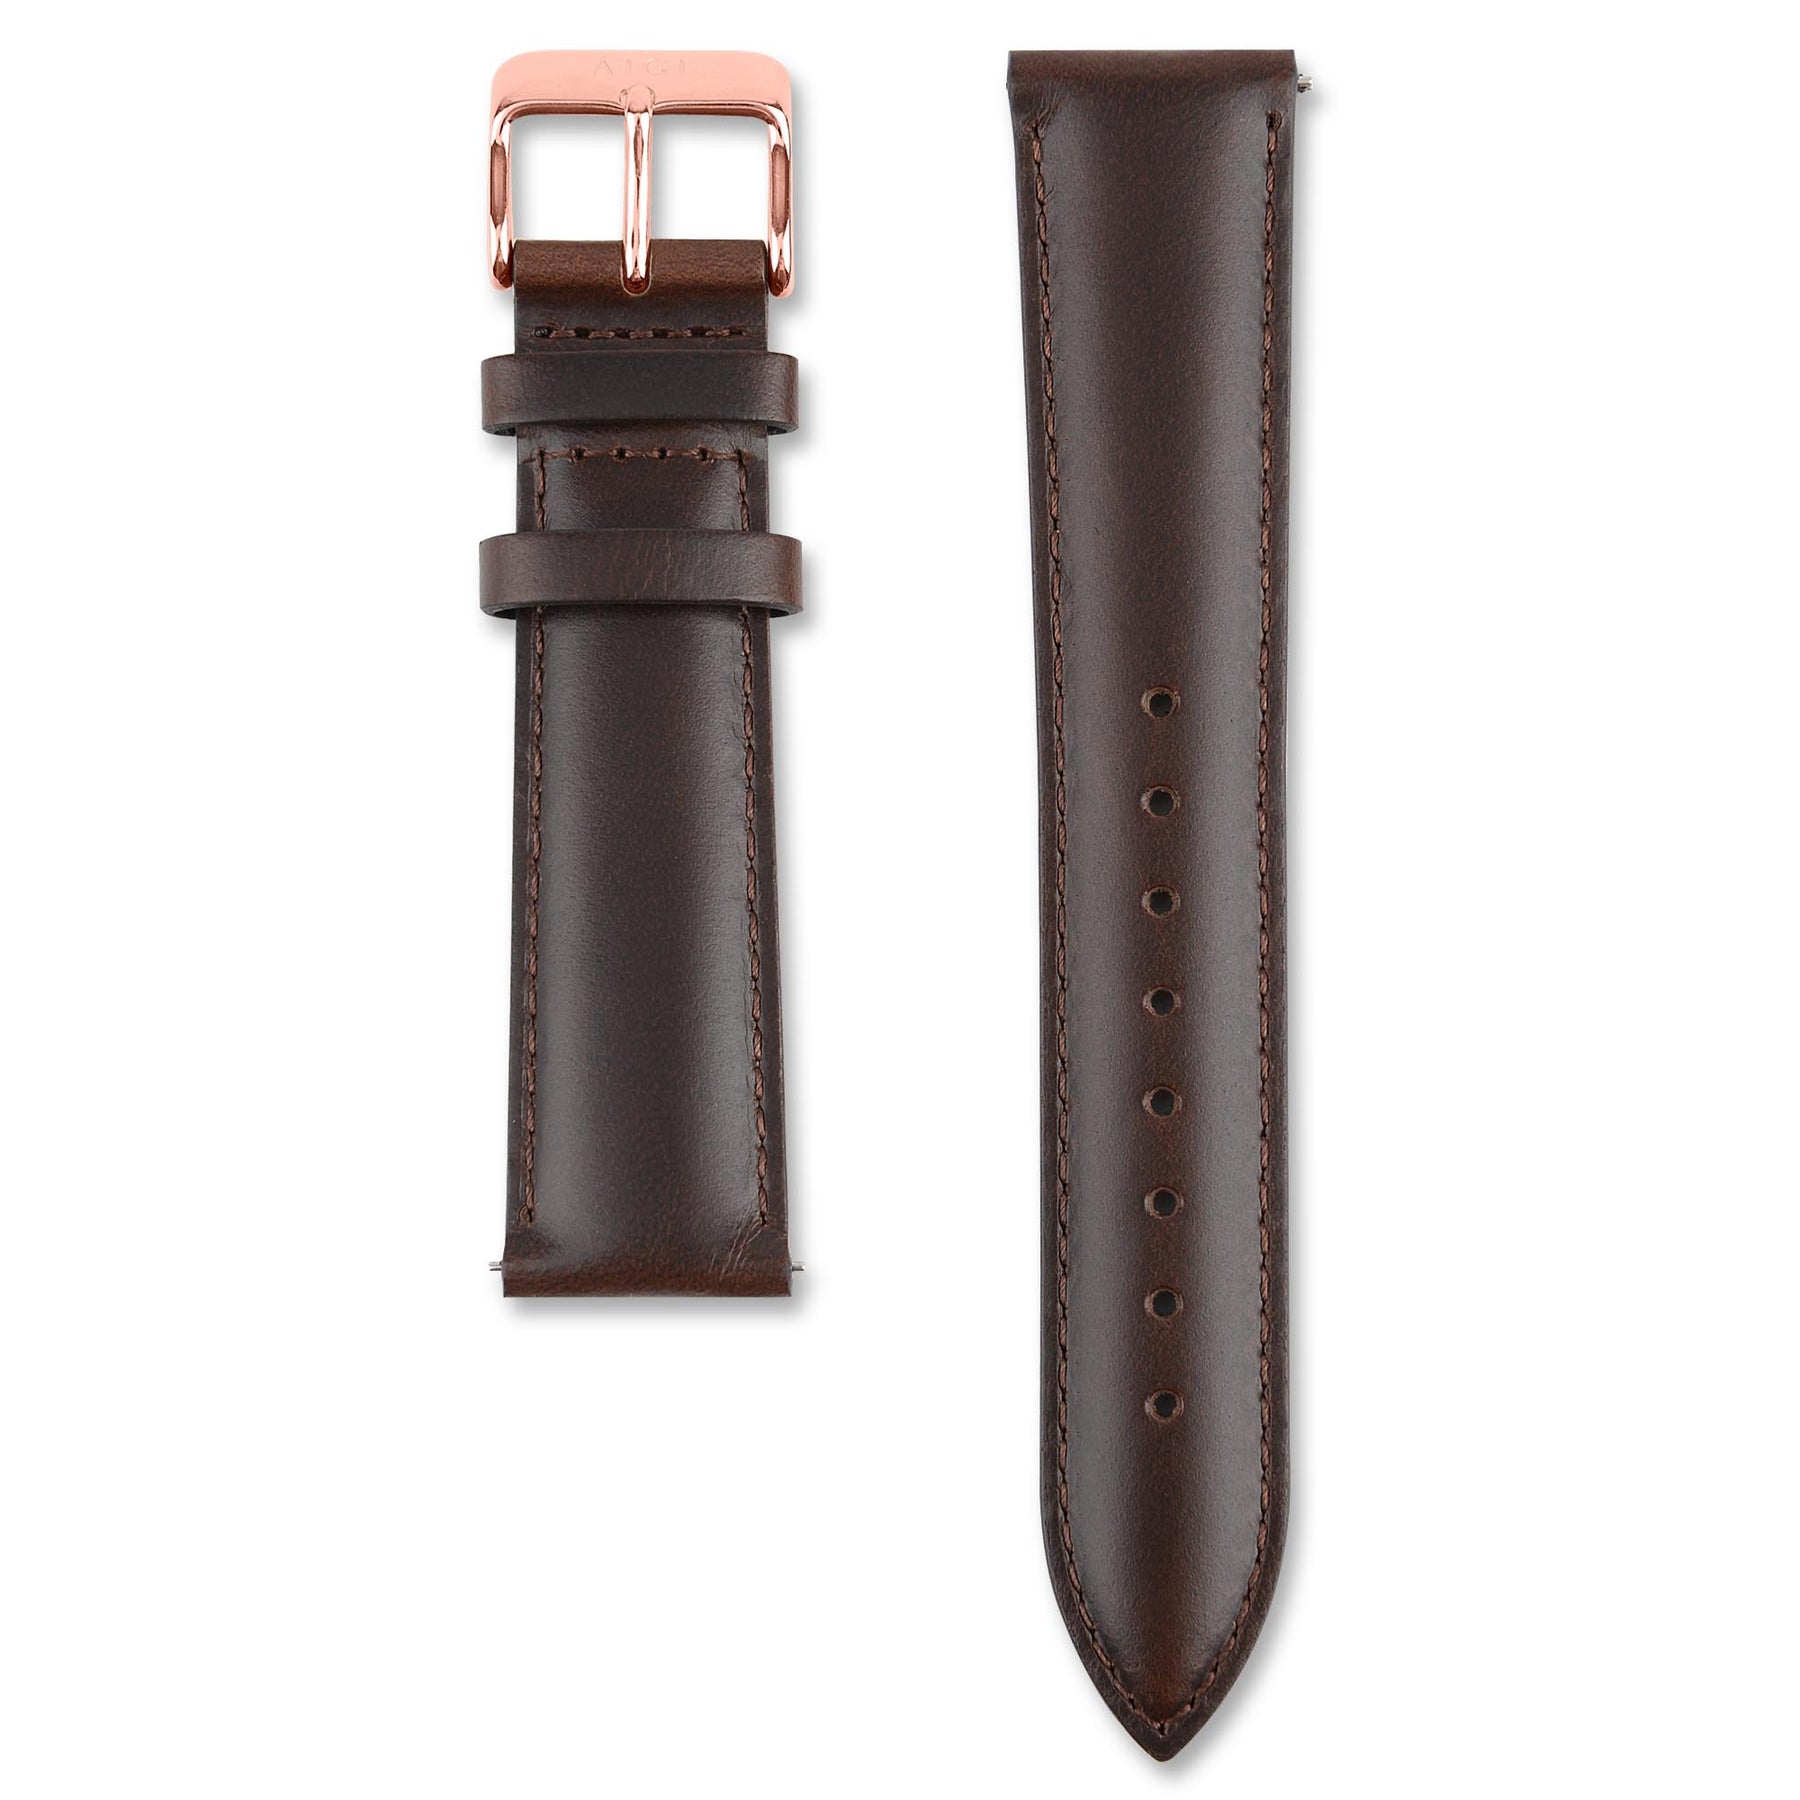 LEATHER BROWN 20MM - ROSEGOLD